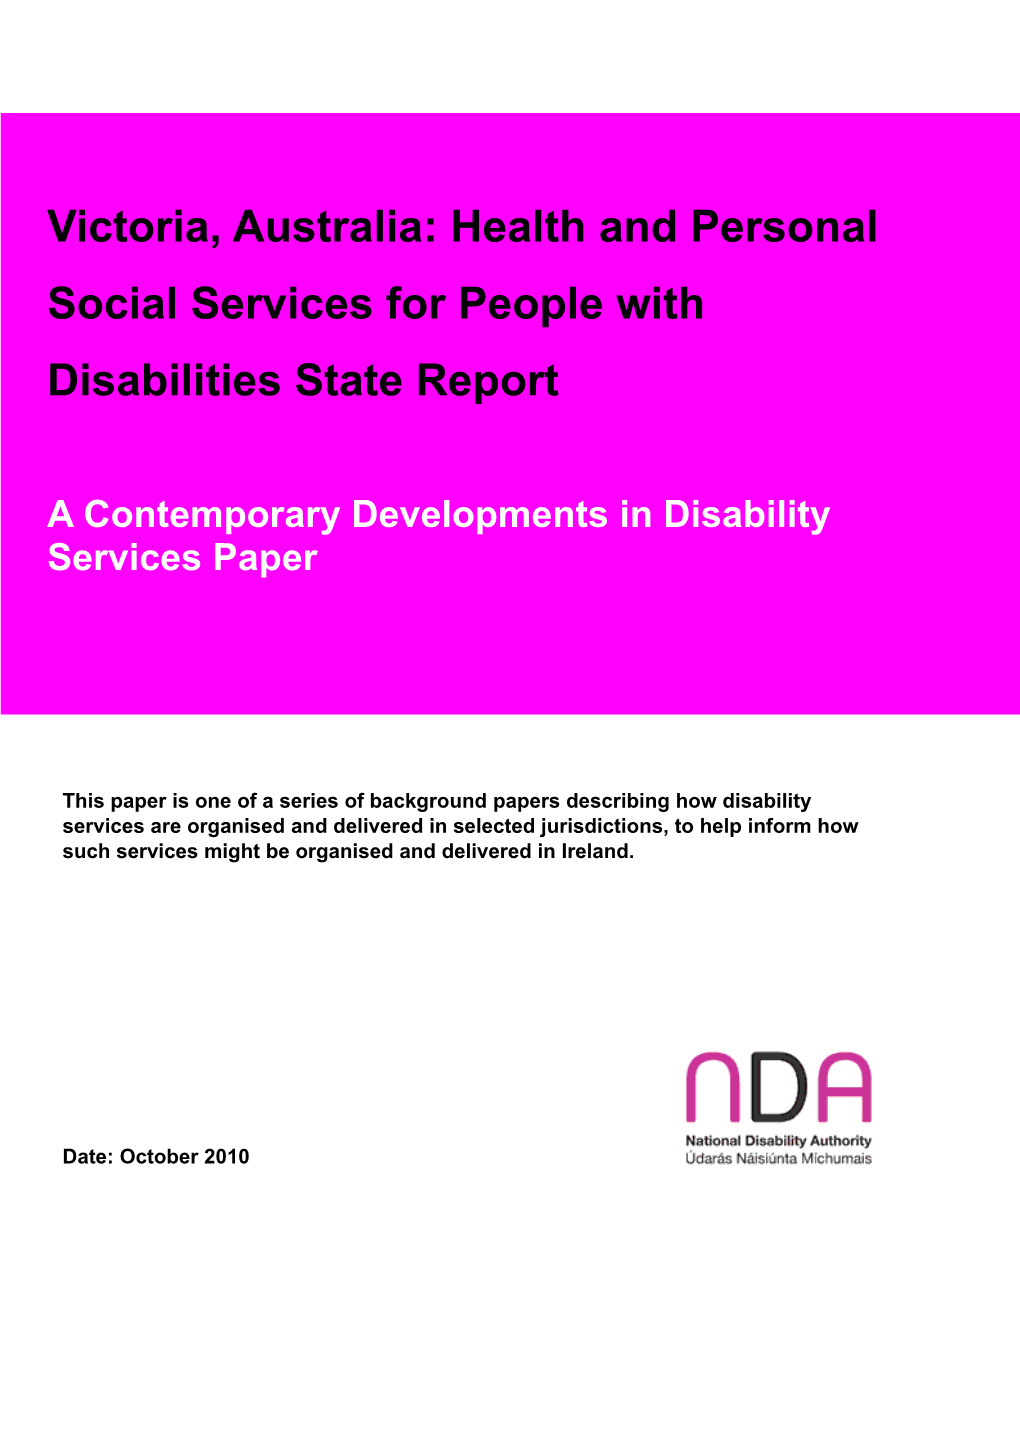 Victoria, Australia: Health and Personal Social Services for People with Disabilities